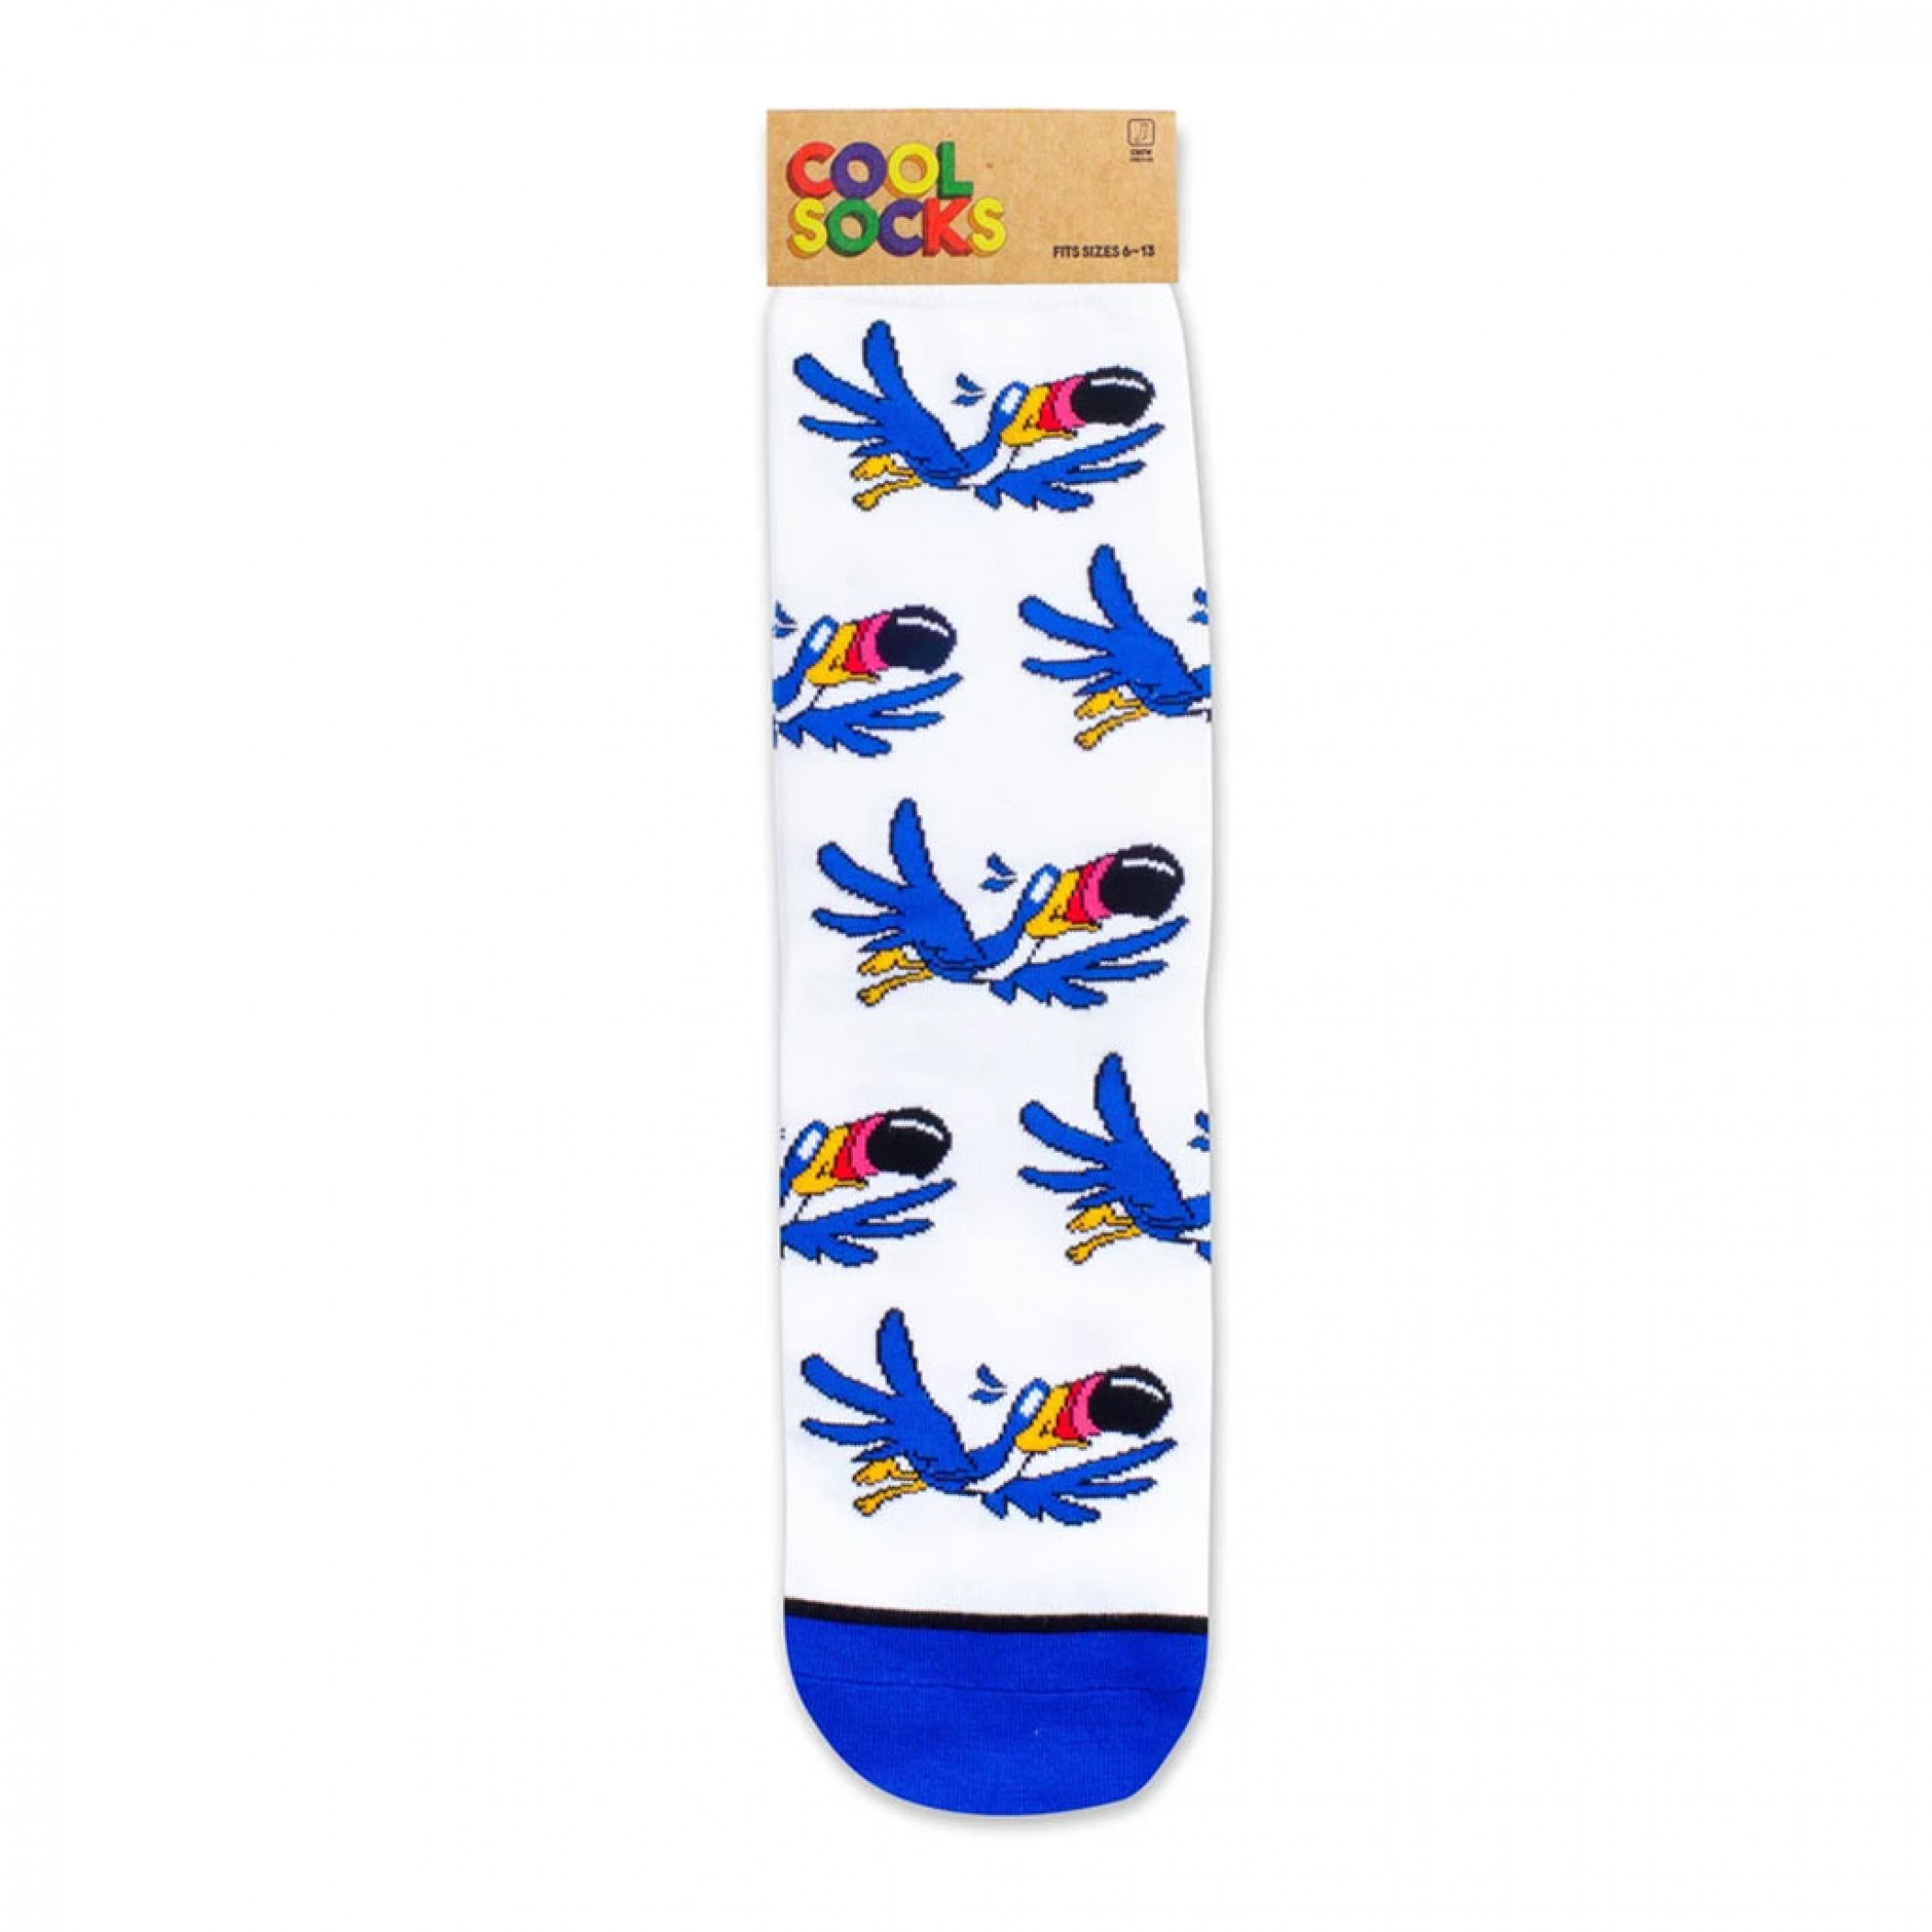 Froot Loops Follow Your Nose Toucan Sam Socks